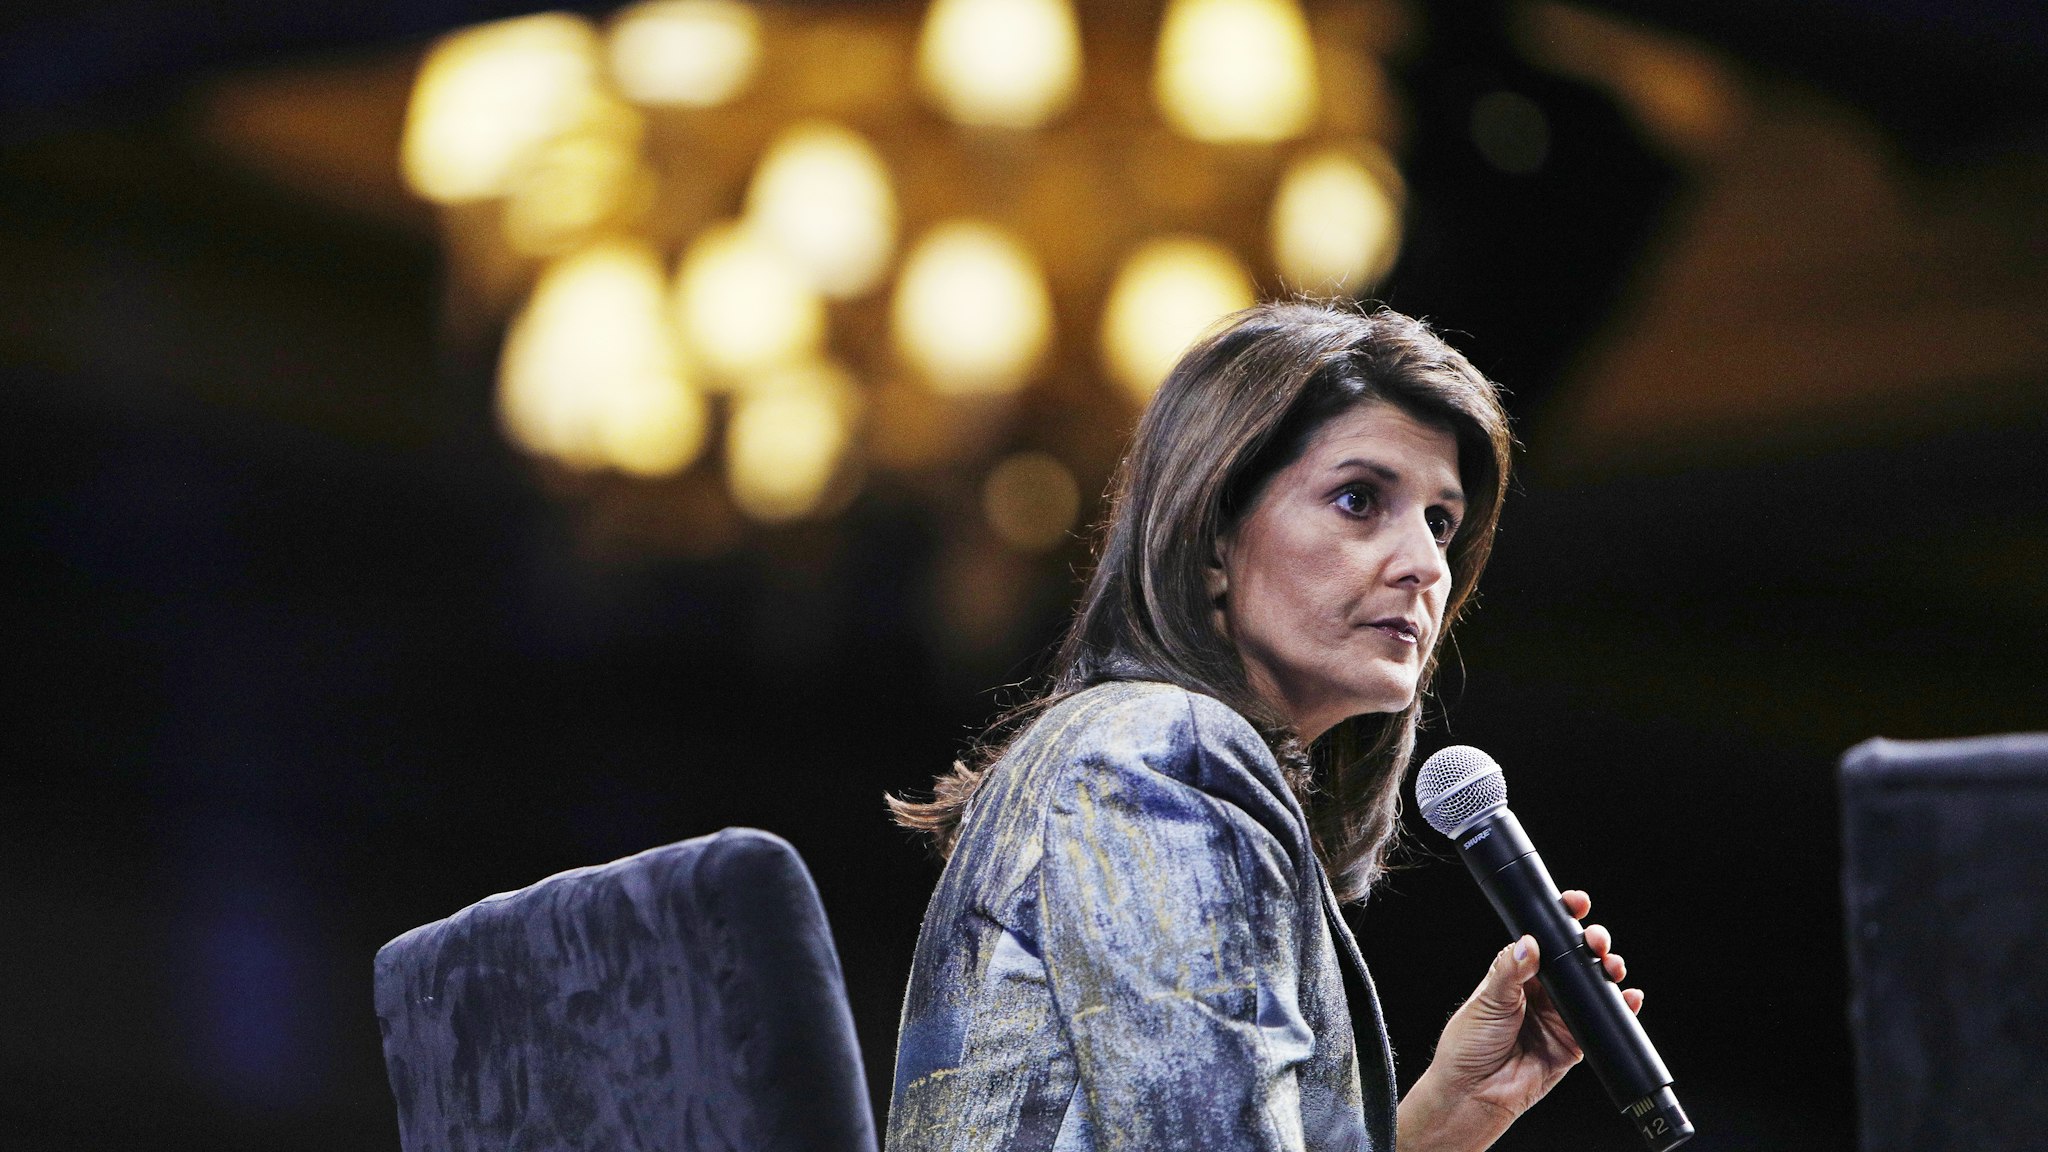 Nikki Haley, former U.S. ambassador to the United Nations (UN), pauses during the Skybridge Alternatives (SALT) conference in Las Vegas, Nevada, U.S., on Thursday, May 9, 2019. SALT brings together investors, policy experts, politicians and business leaders to network and share ideas to unlock growth opportunities in finance, economics, entrepreneurship, public policy, technology and philanthropy.